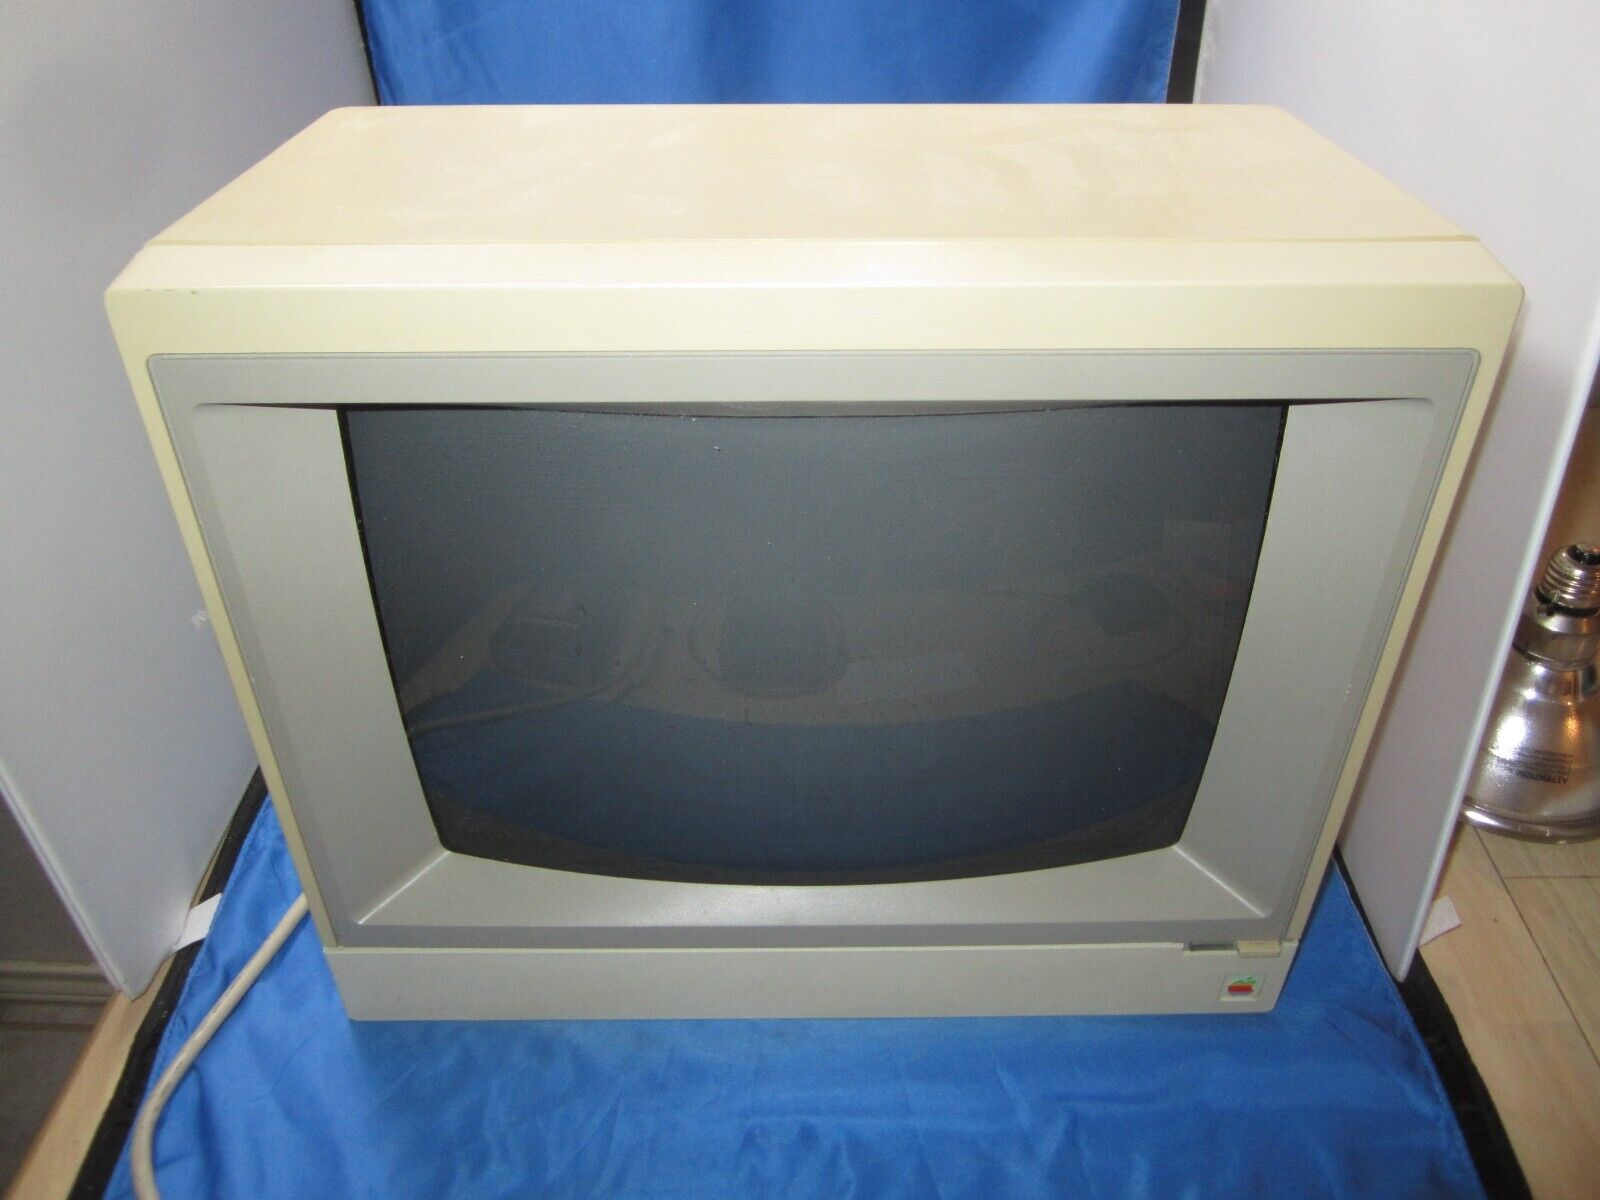 VINTAGE APPLE COLOR MONITOR IIE SOLD AS IS